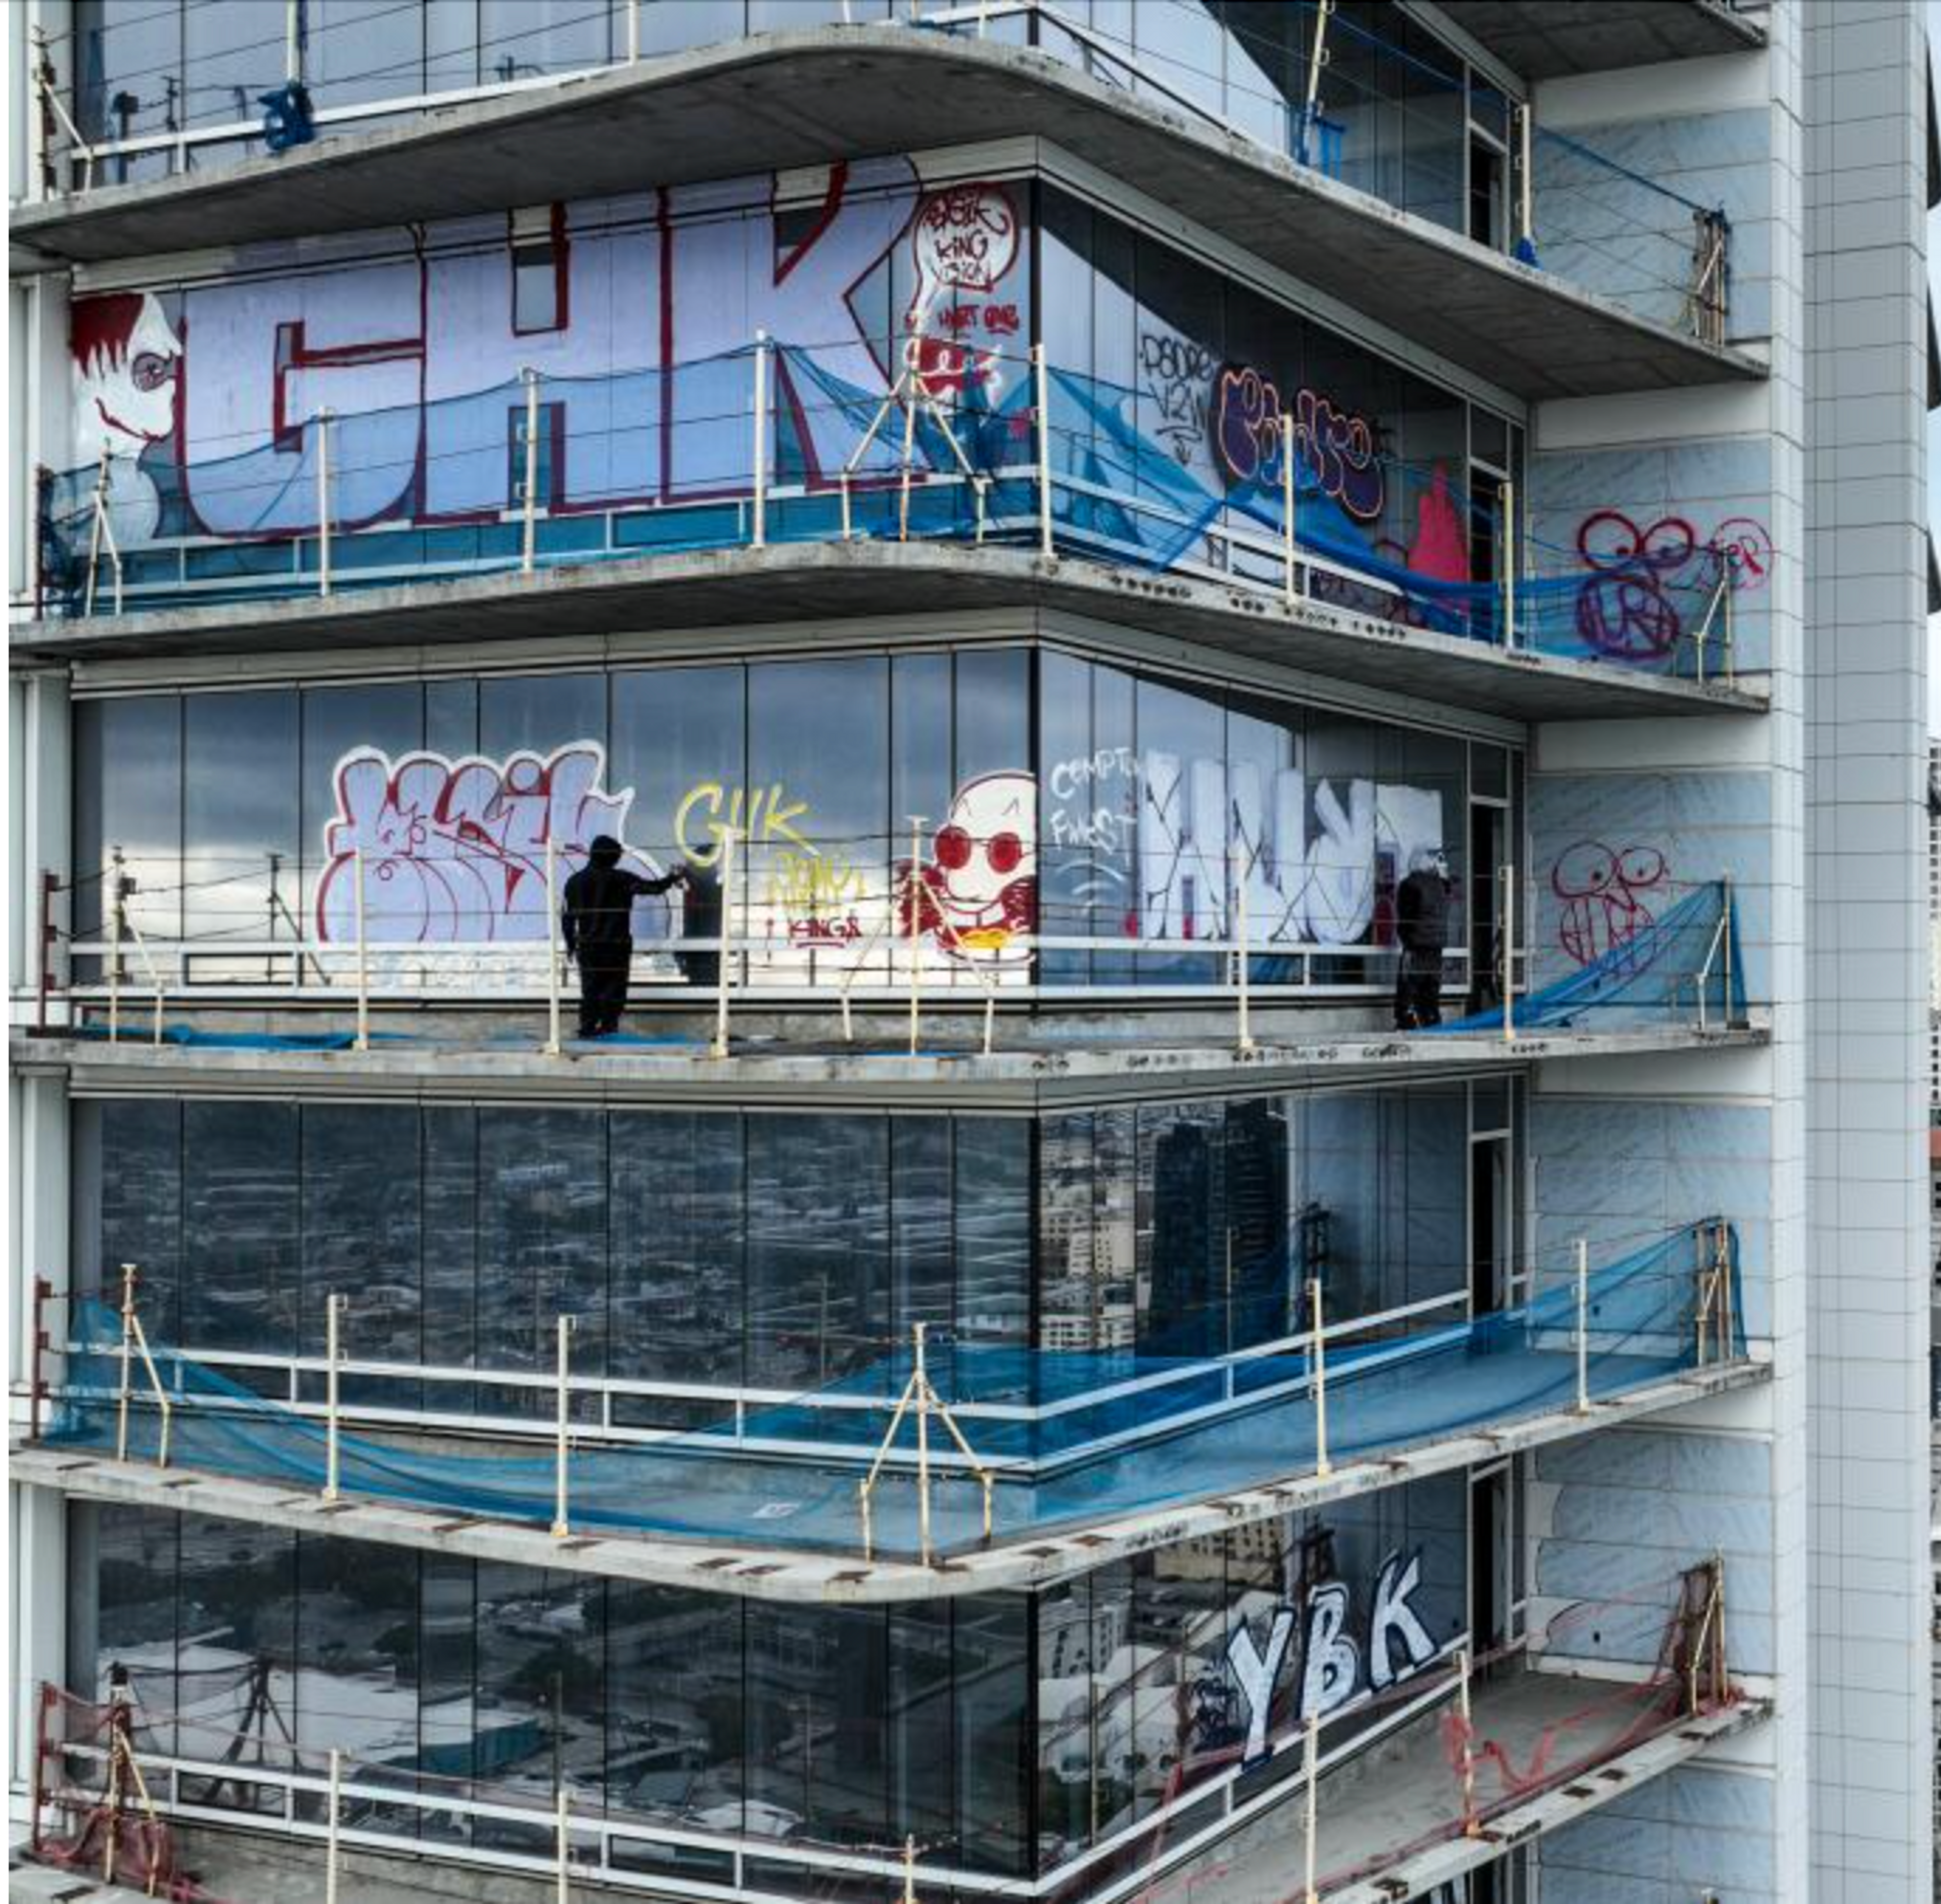 Photo courtesy of the LA Times. Shows a tagger spray painting the heavily tagged Oceanwide Plaza tower. Five stories are visible.